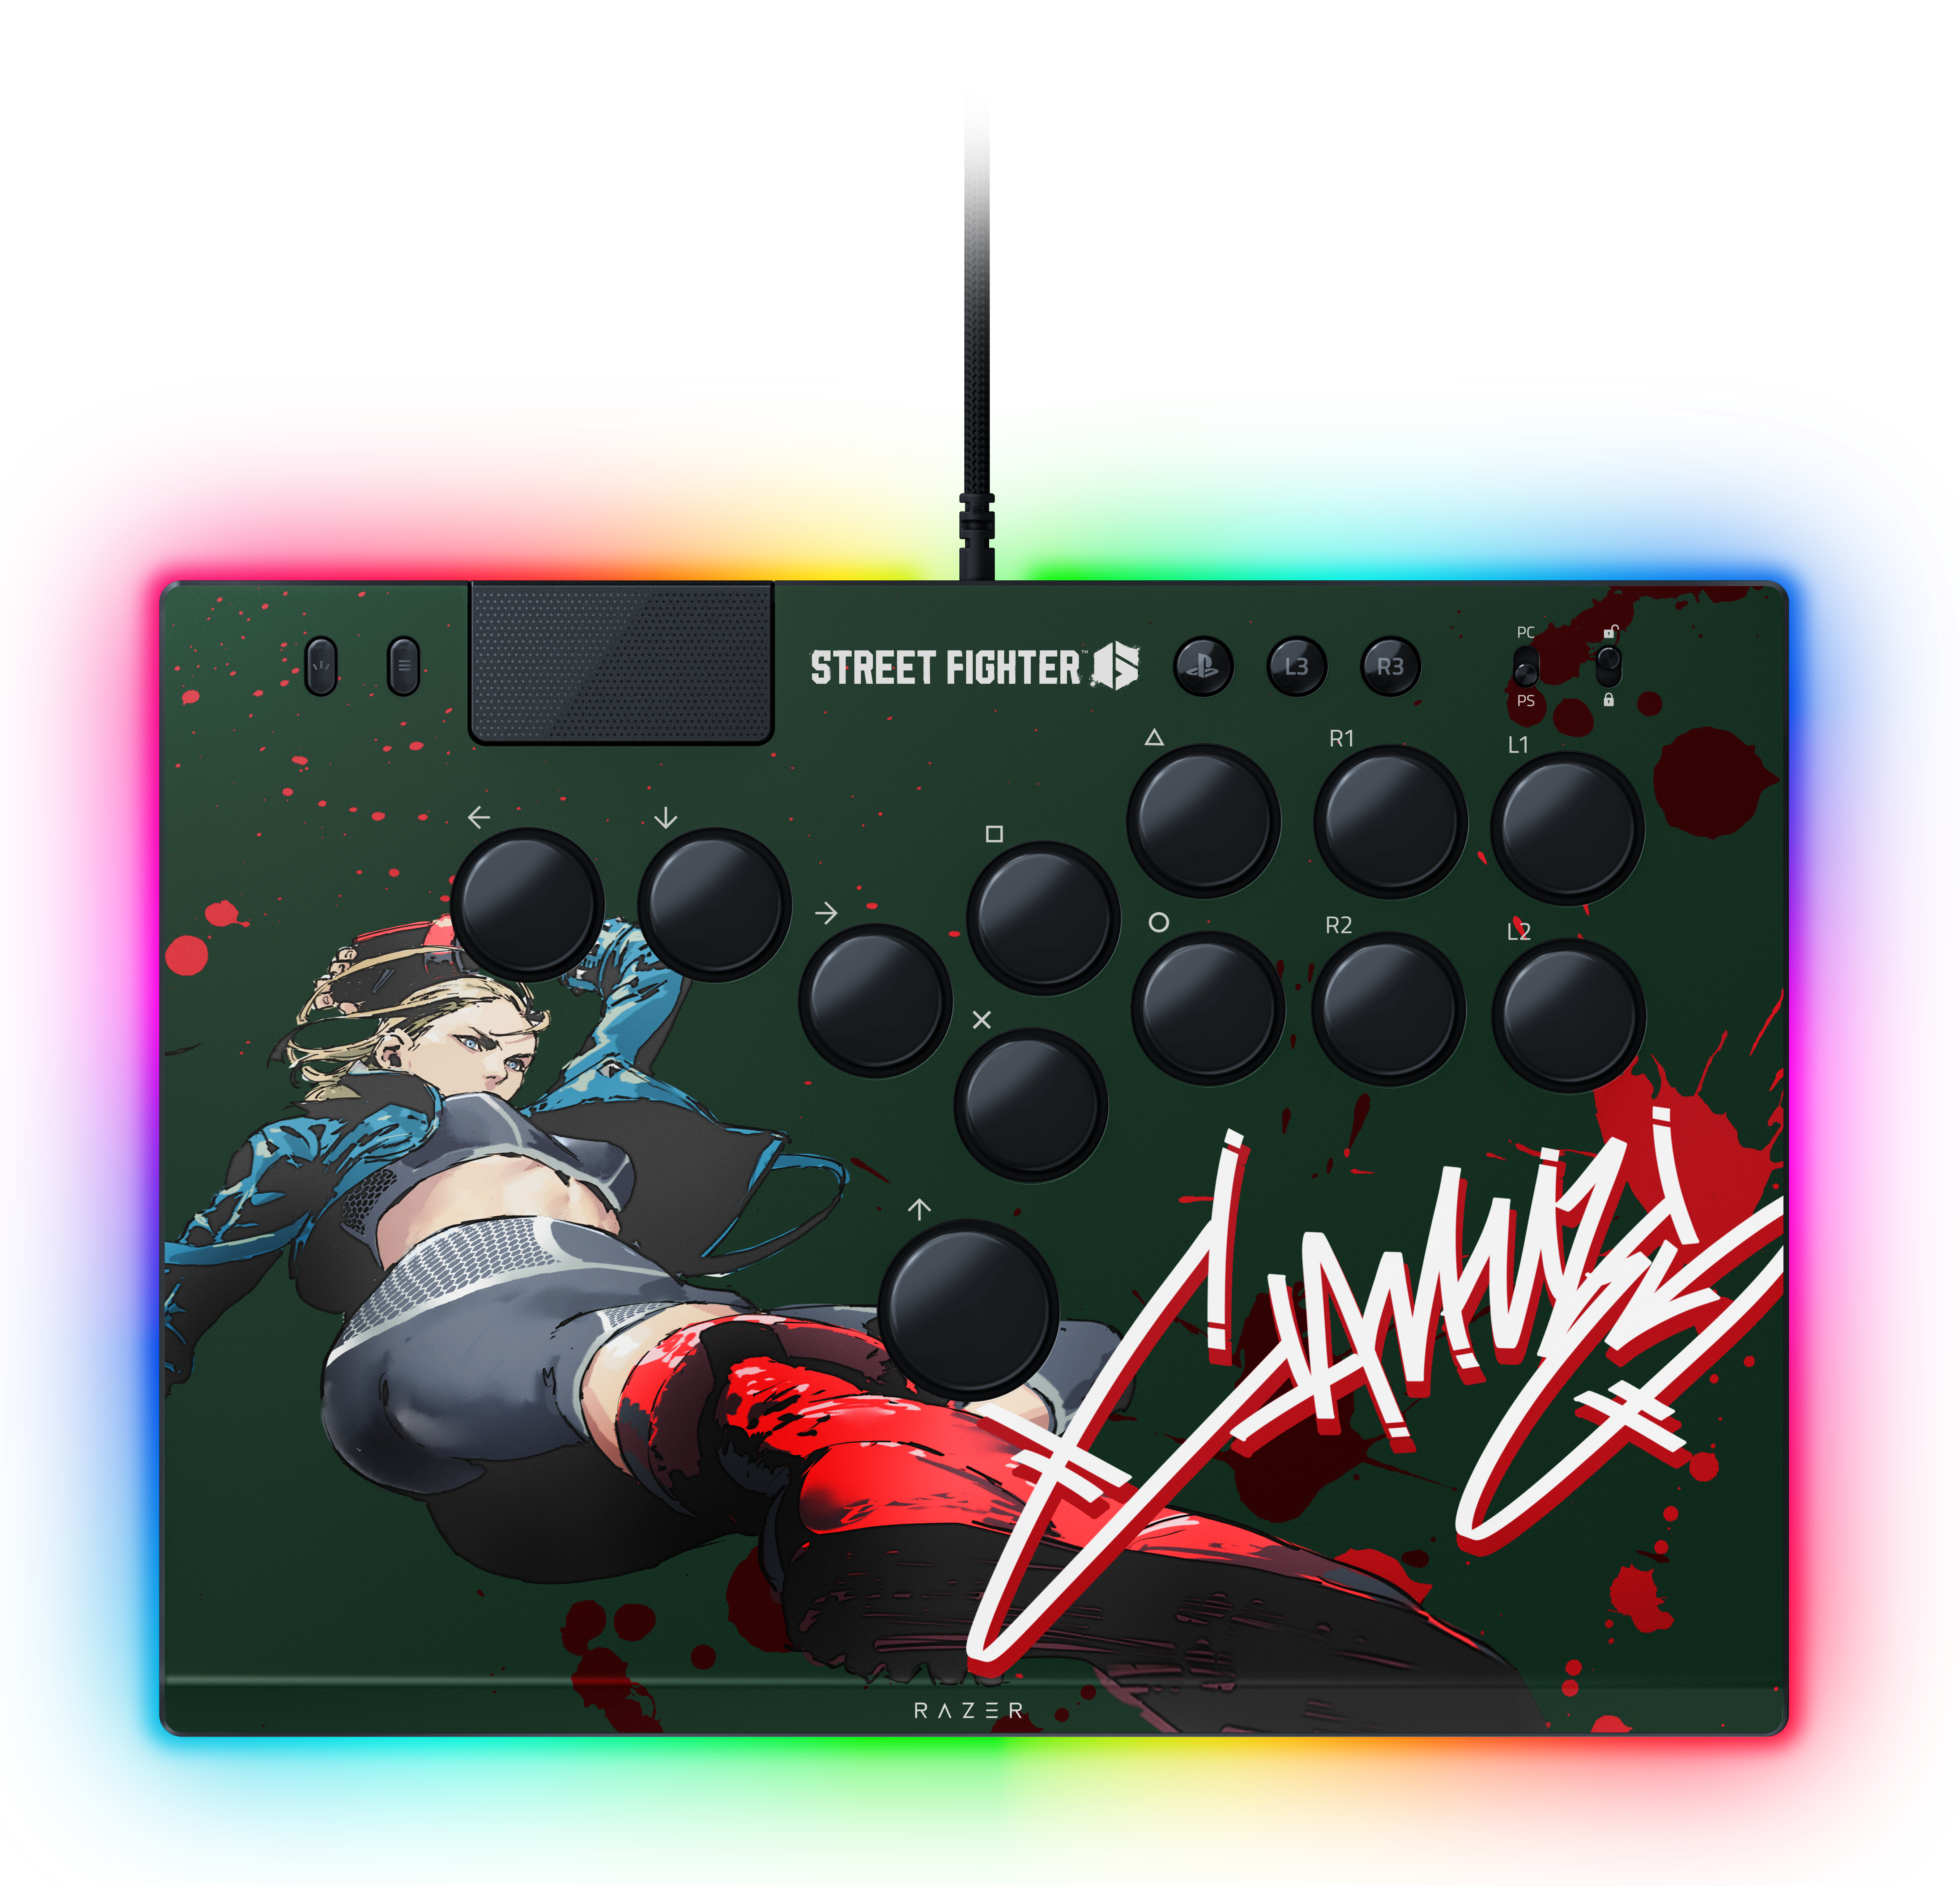 Razer Kitsune Hitbox-Style Fight Controller Preorder Guide - Street Fighter  6 Editions Available - GameSpot